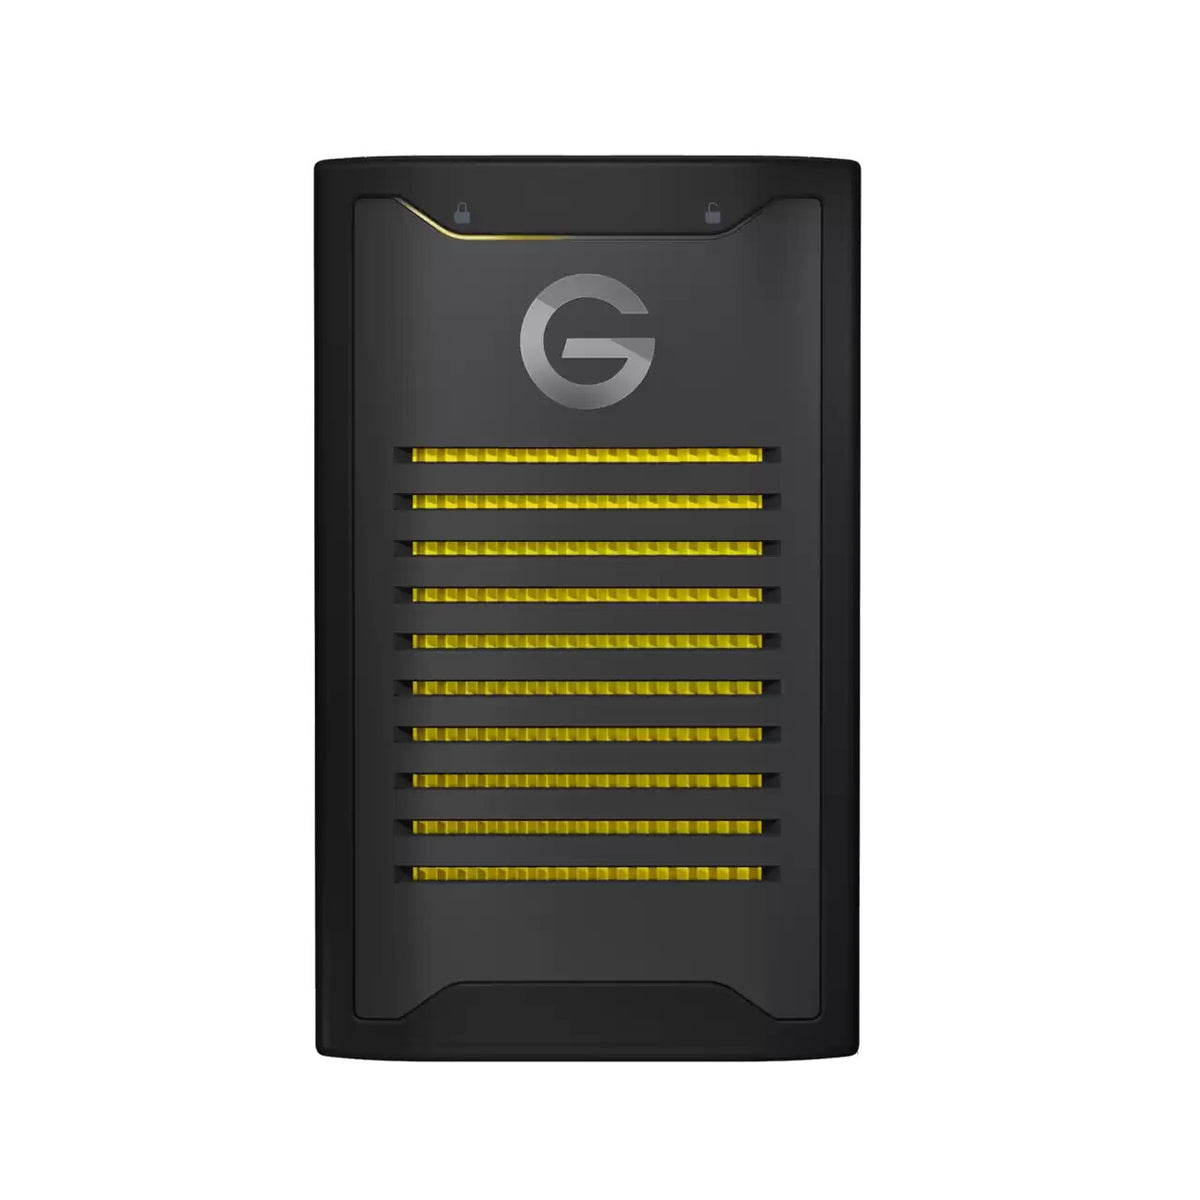 SanDisk G-DRIVE ArmorLock with Password Protection - External hard drive - 4 TB